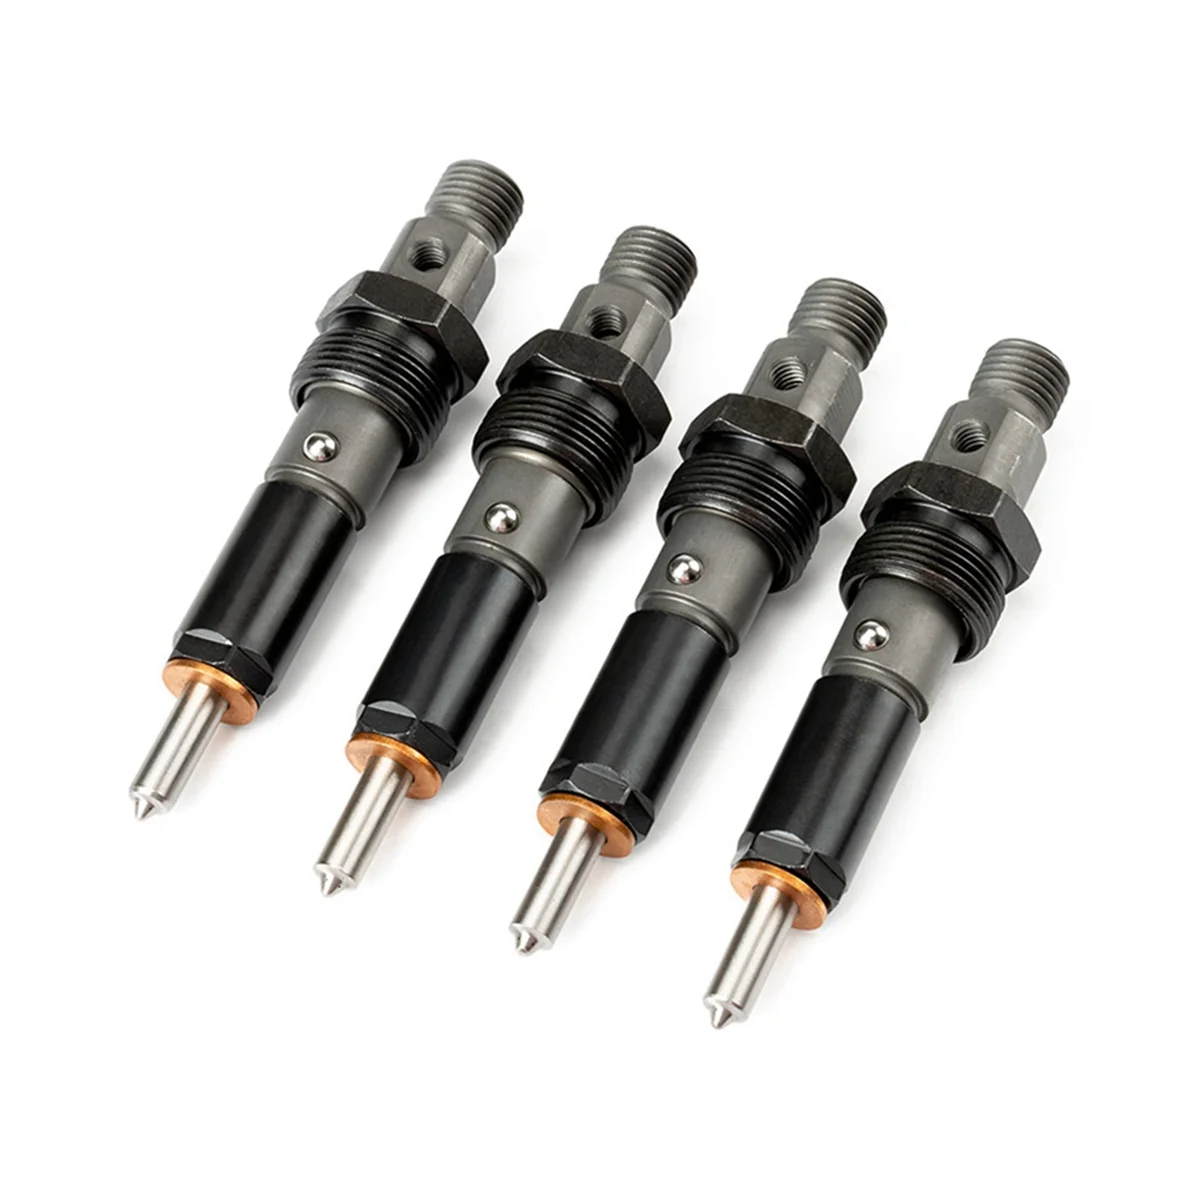 

4PCS Crude Oil Engine Parts Fuel Injection Common Rail Injector for Cummins for Dodge Ram 390KAL59P6 KDAL59P6 4928990